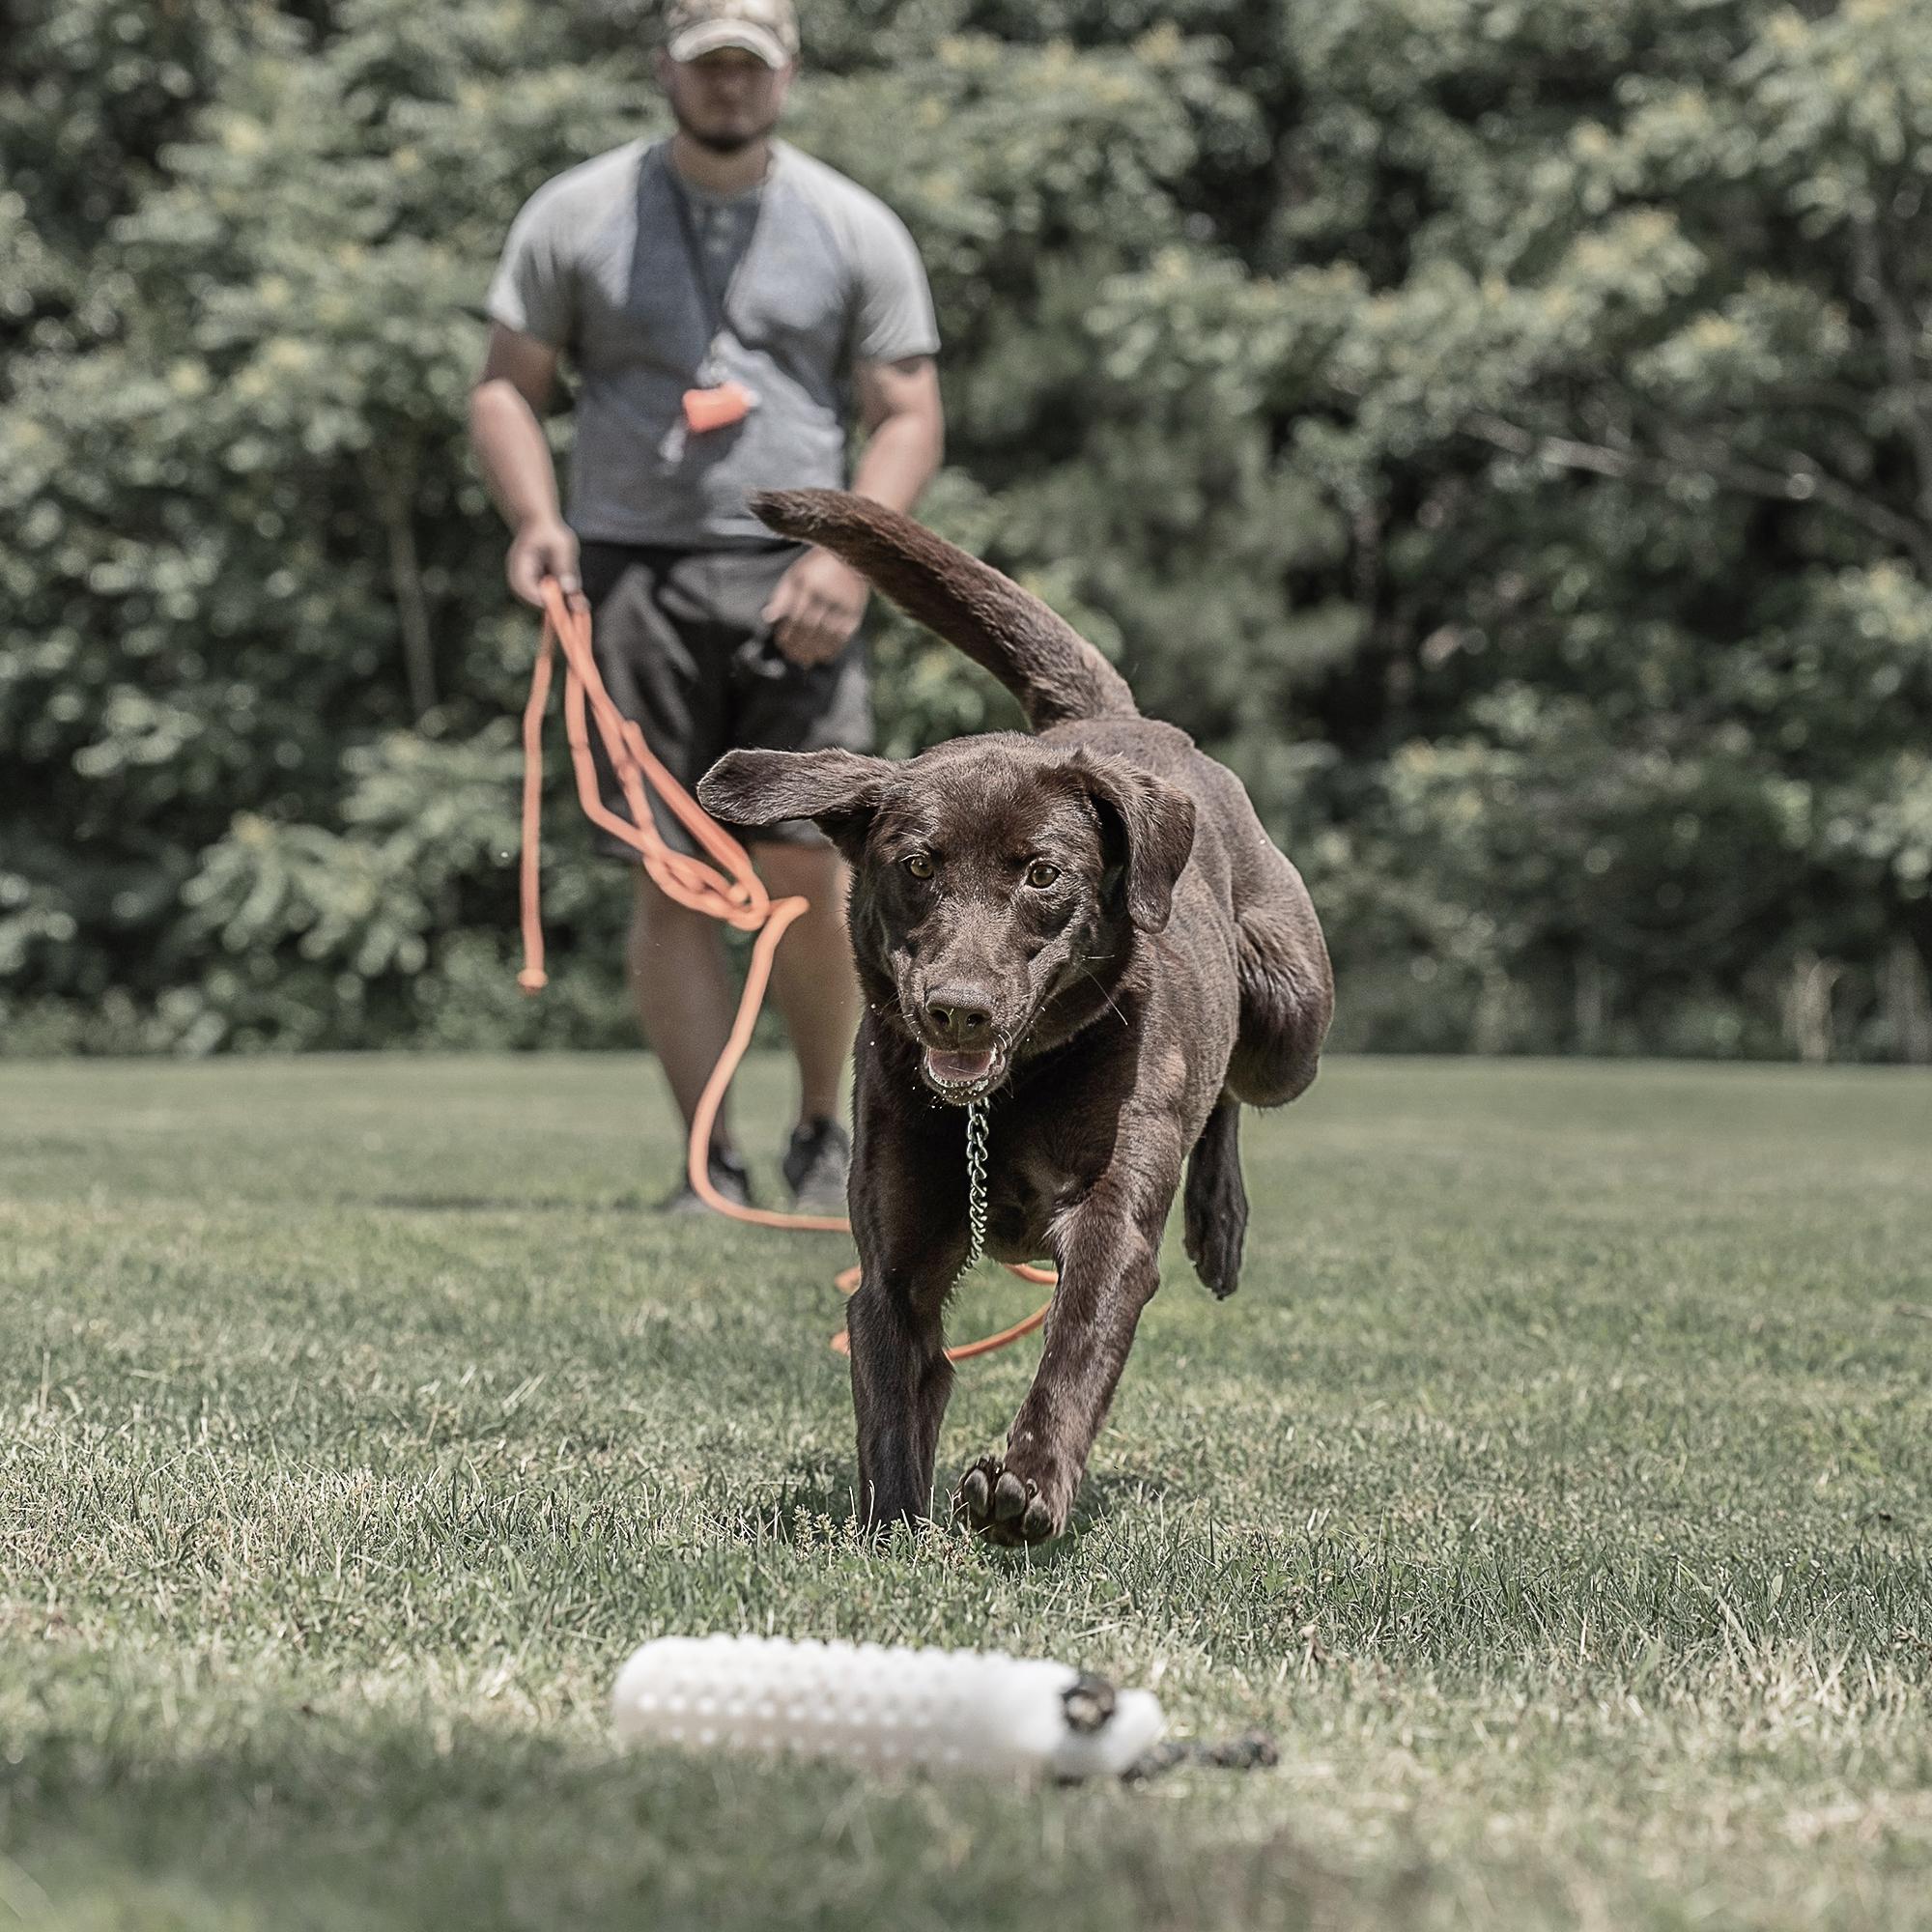 Young chocolate lab jumping on bumper with trainer in background holding check cord